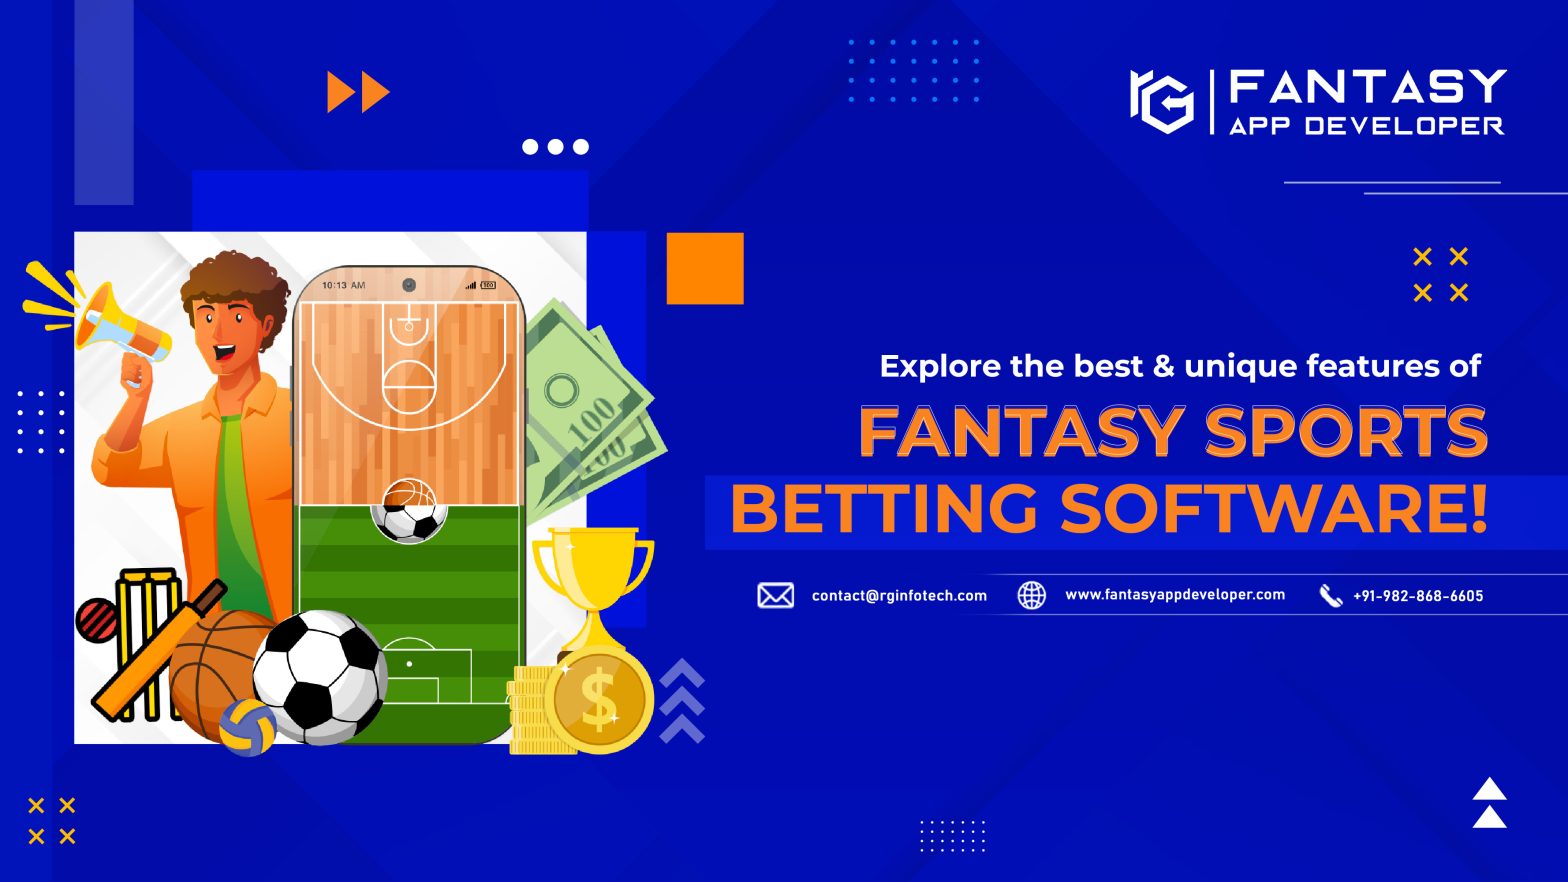 Explore-the-best-&-unique-features-of-Fantasy-Sports-Betting-Software!